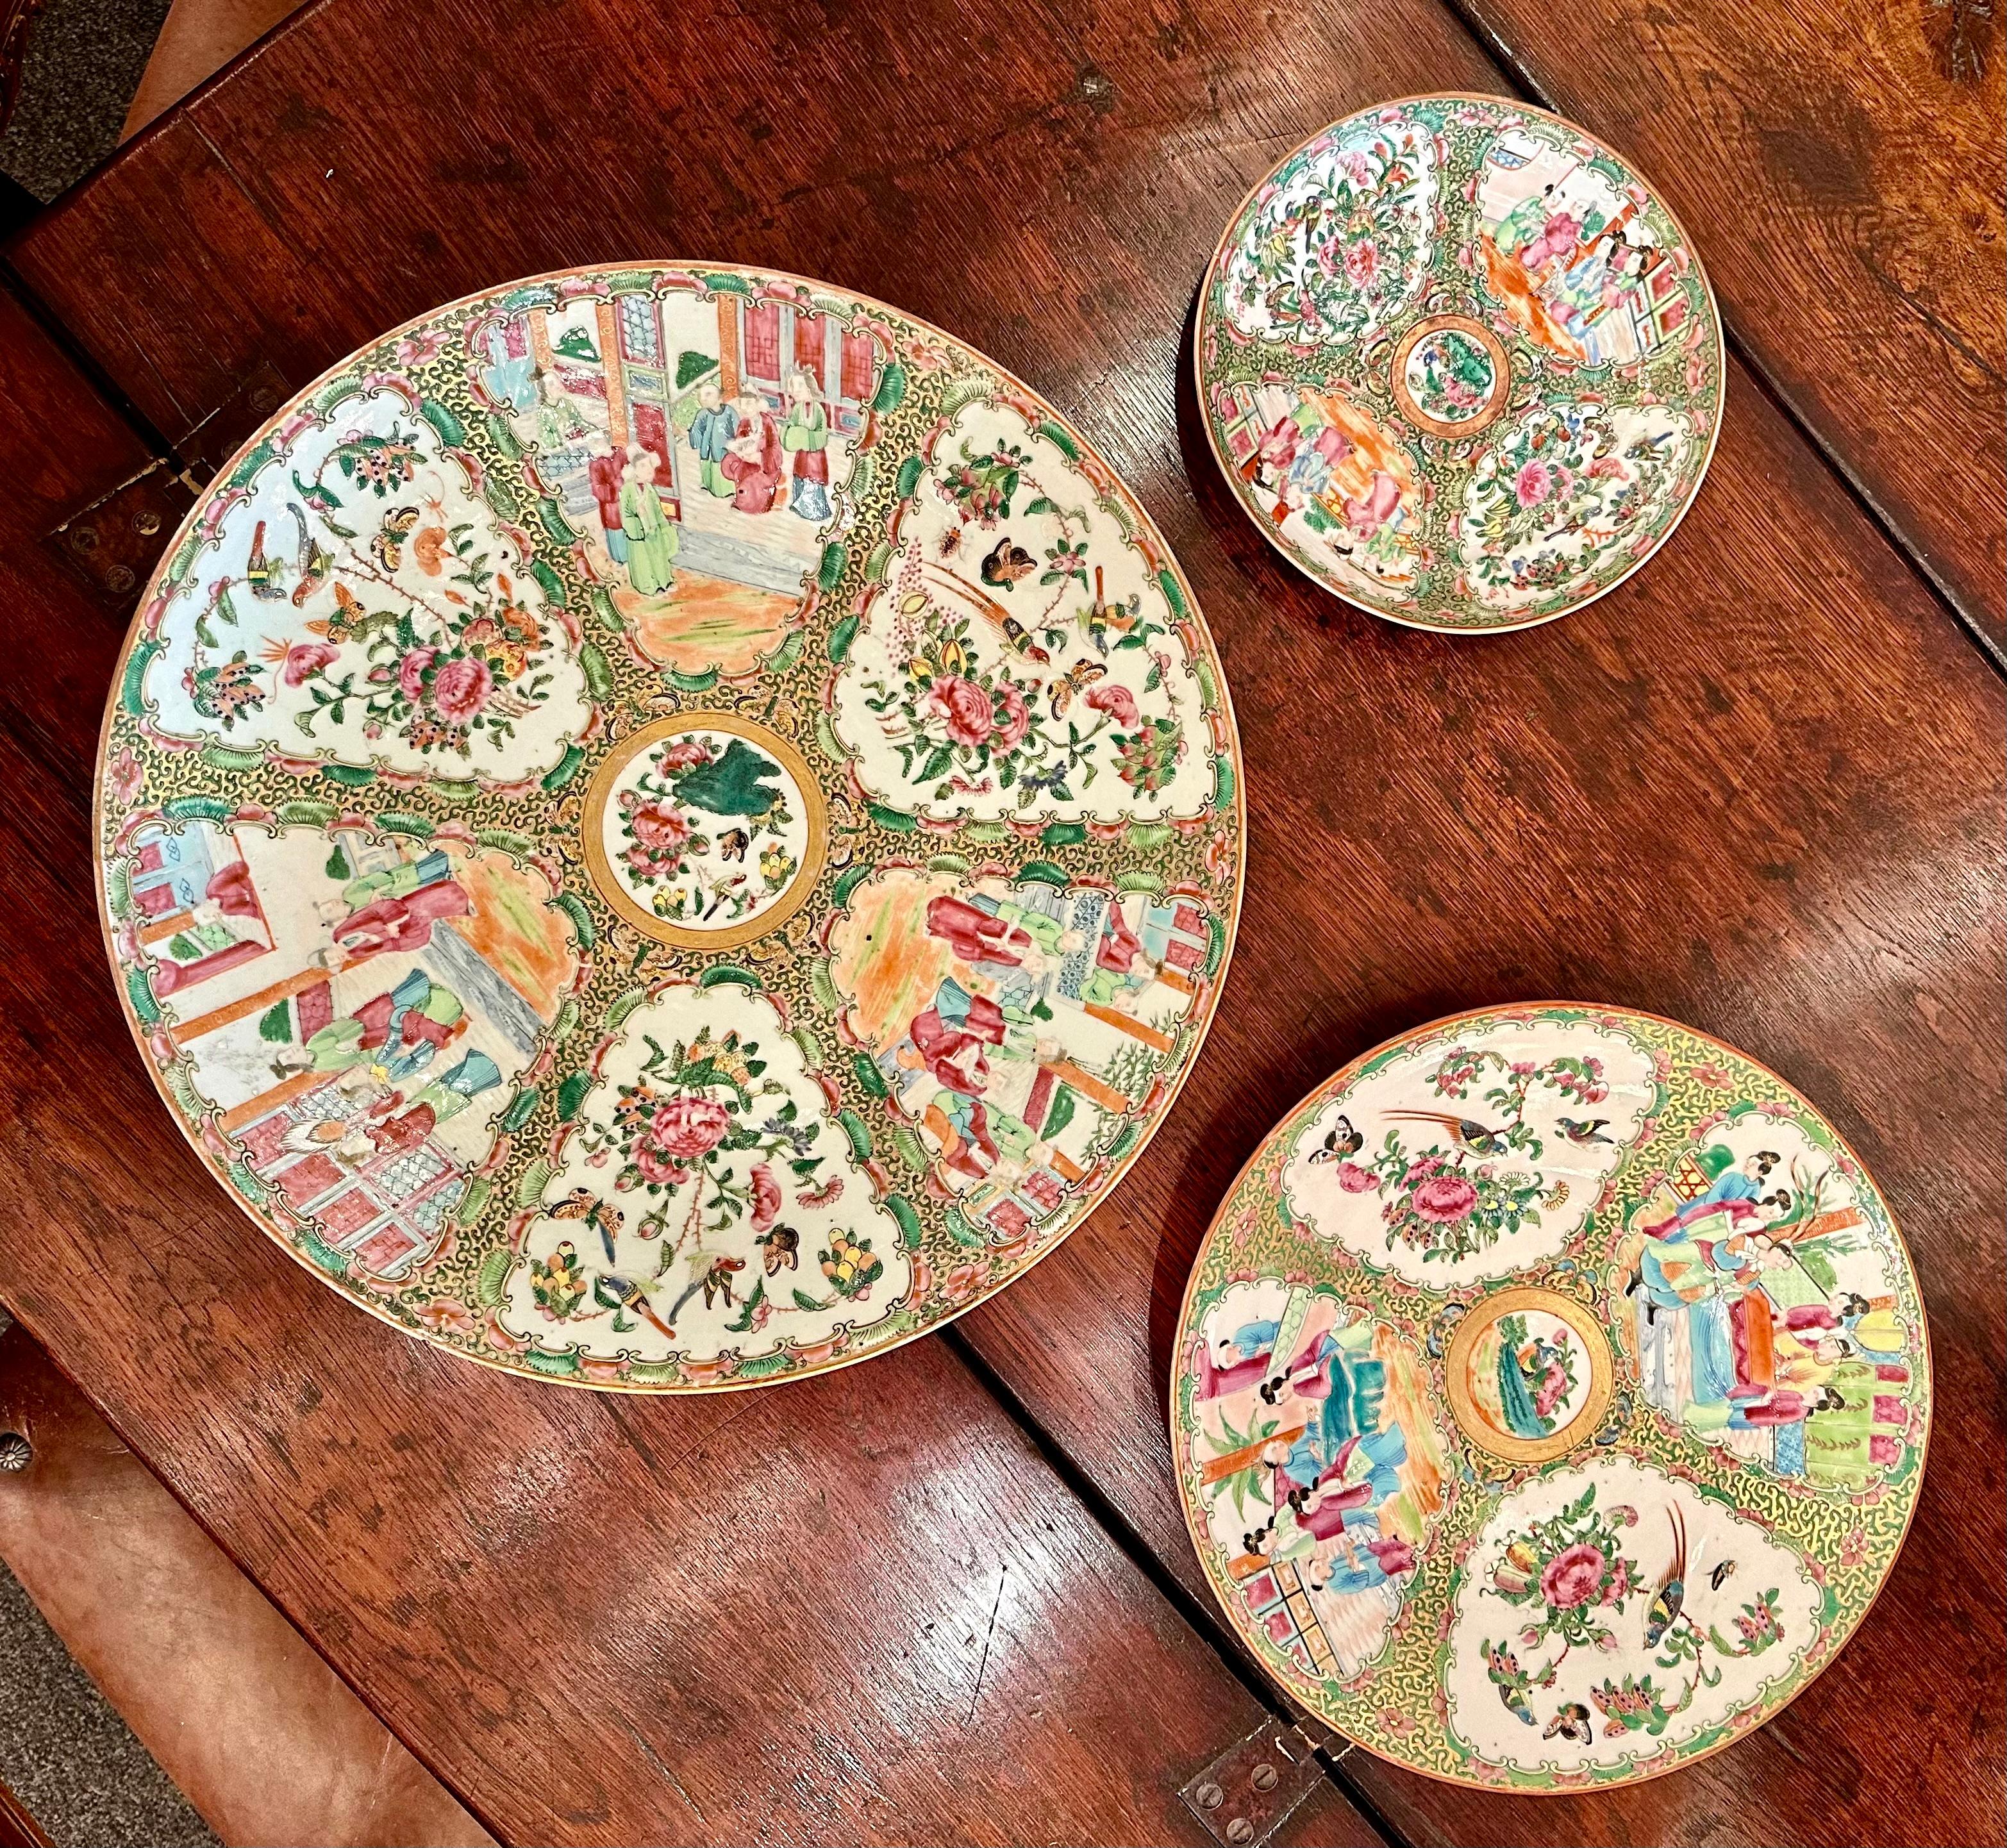 Special Listing for the Purchase of 3 Famille Rose Plates at Once for One Shipping Fee.
The first plate is a large antique Chinese Famille Rose or Rose Medallion porcelain charger plate, circa 1880s-1890s. The measurements are 2 1/2